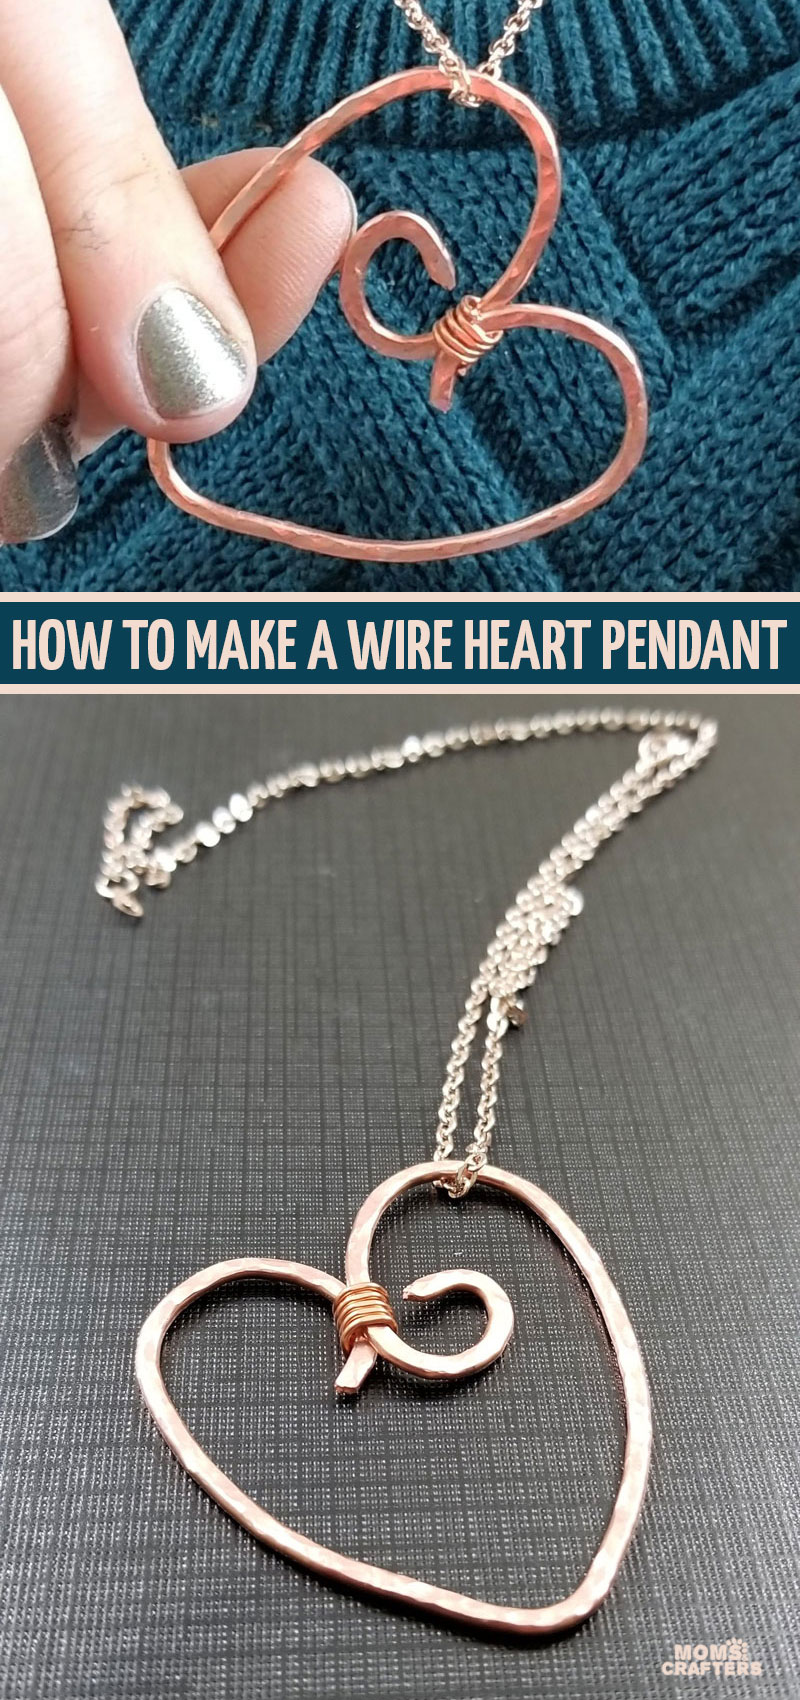 Click to learn how to make a hammered wire heart necklace from scratch! This wire heart pendant tutorial is a great wire wrapping project for beginners and jewelry making idea for all ages. It's great for valentine's day crafts or for any time of year.